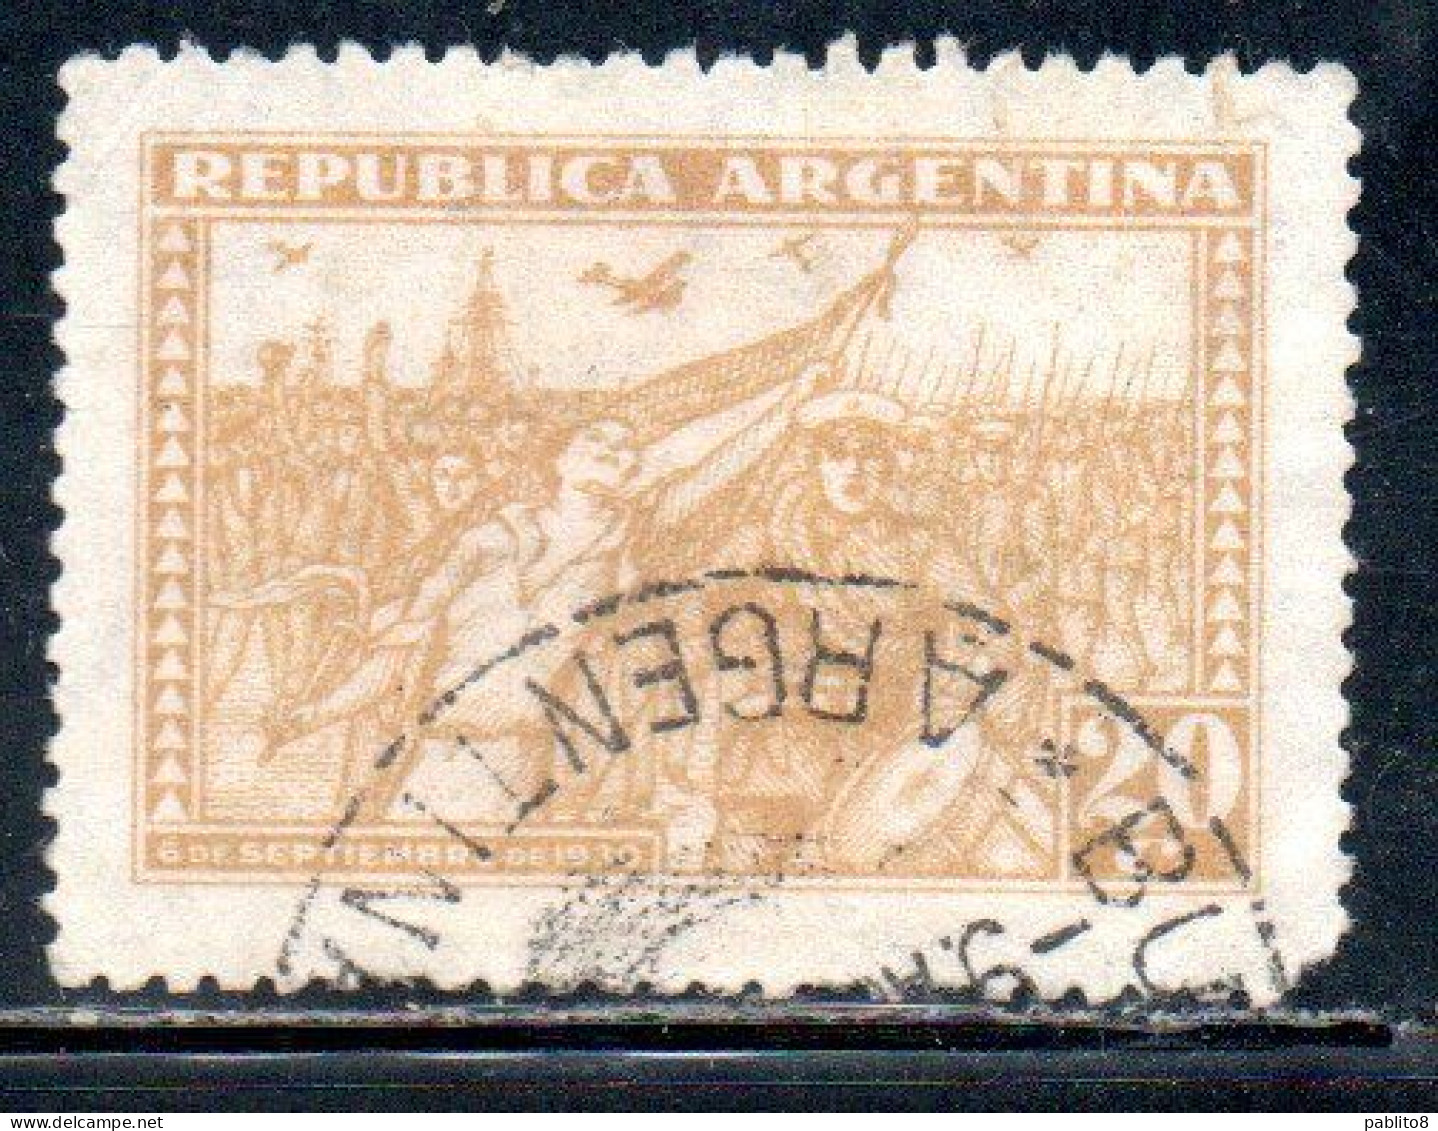 ARGENTINA 1930 REVOLUTION OF 1930 MARCH OF THE VICTORIOUS INSURGENS 20c USED USADO OBLITERE' - Gebraucht